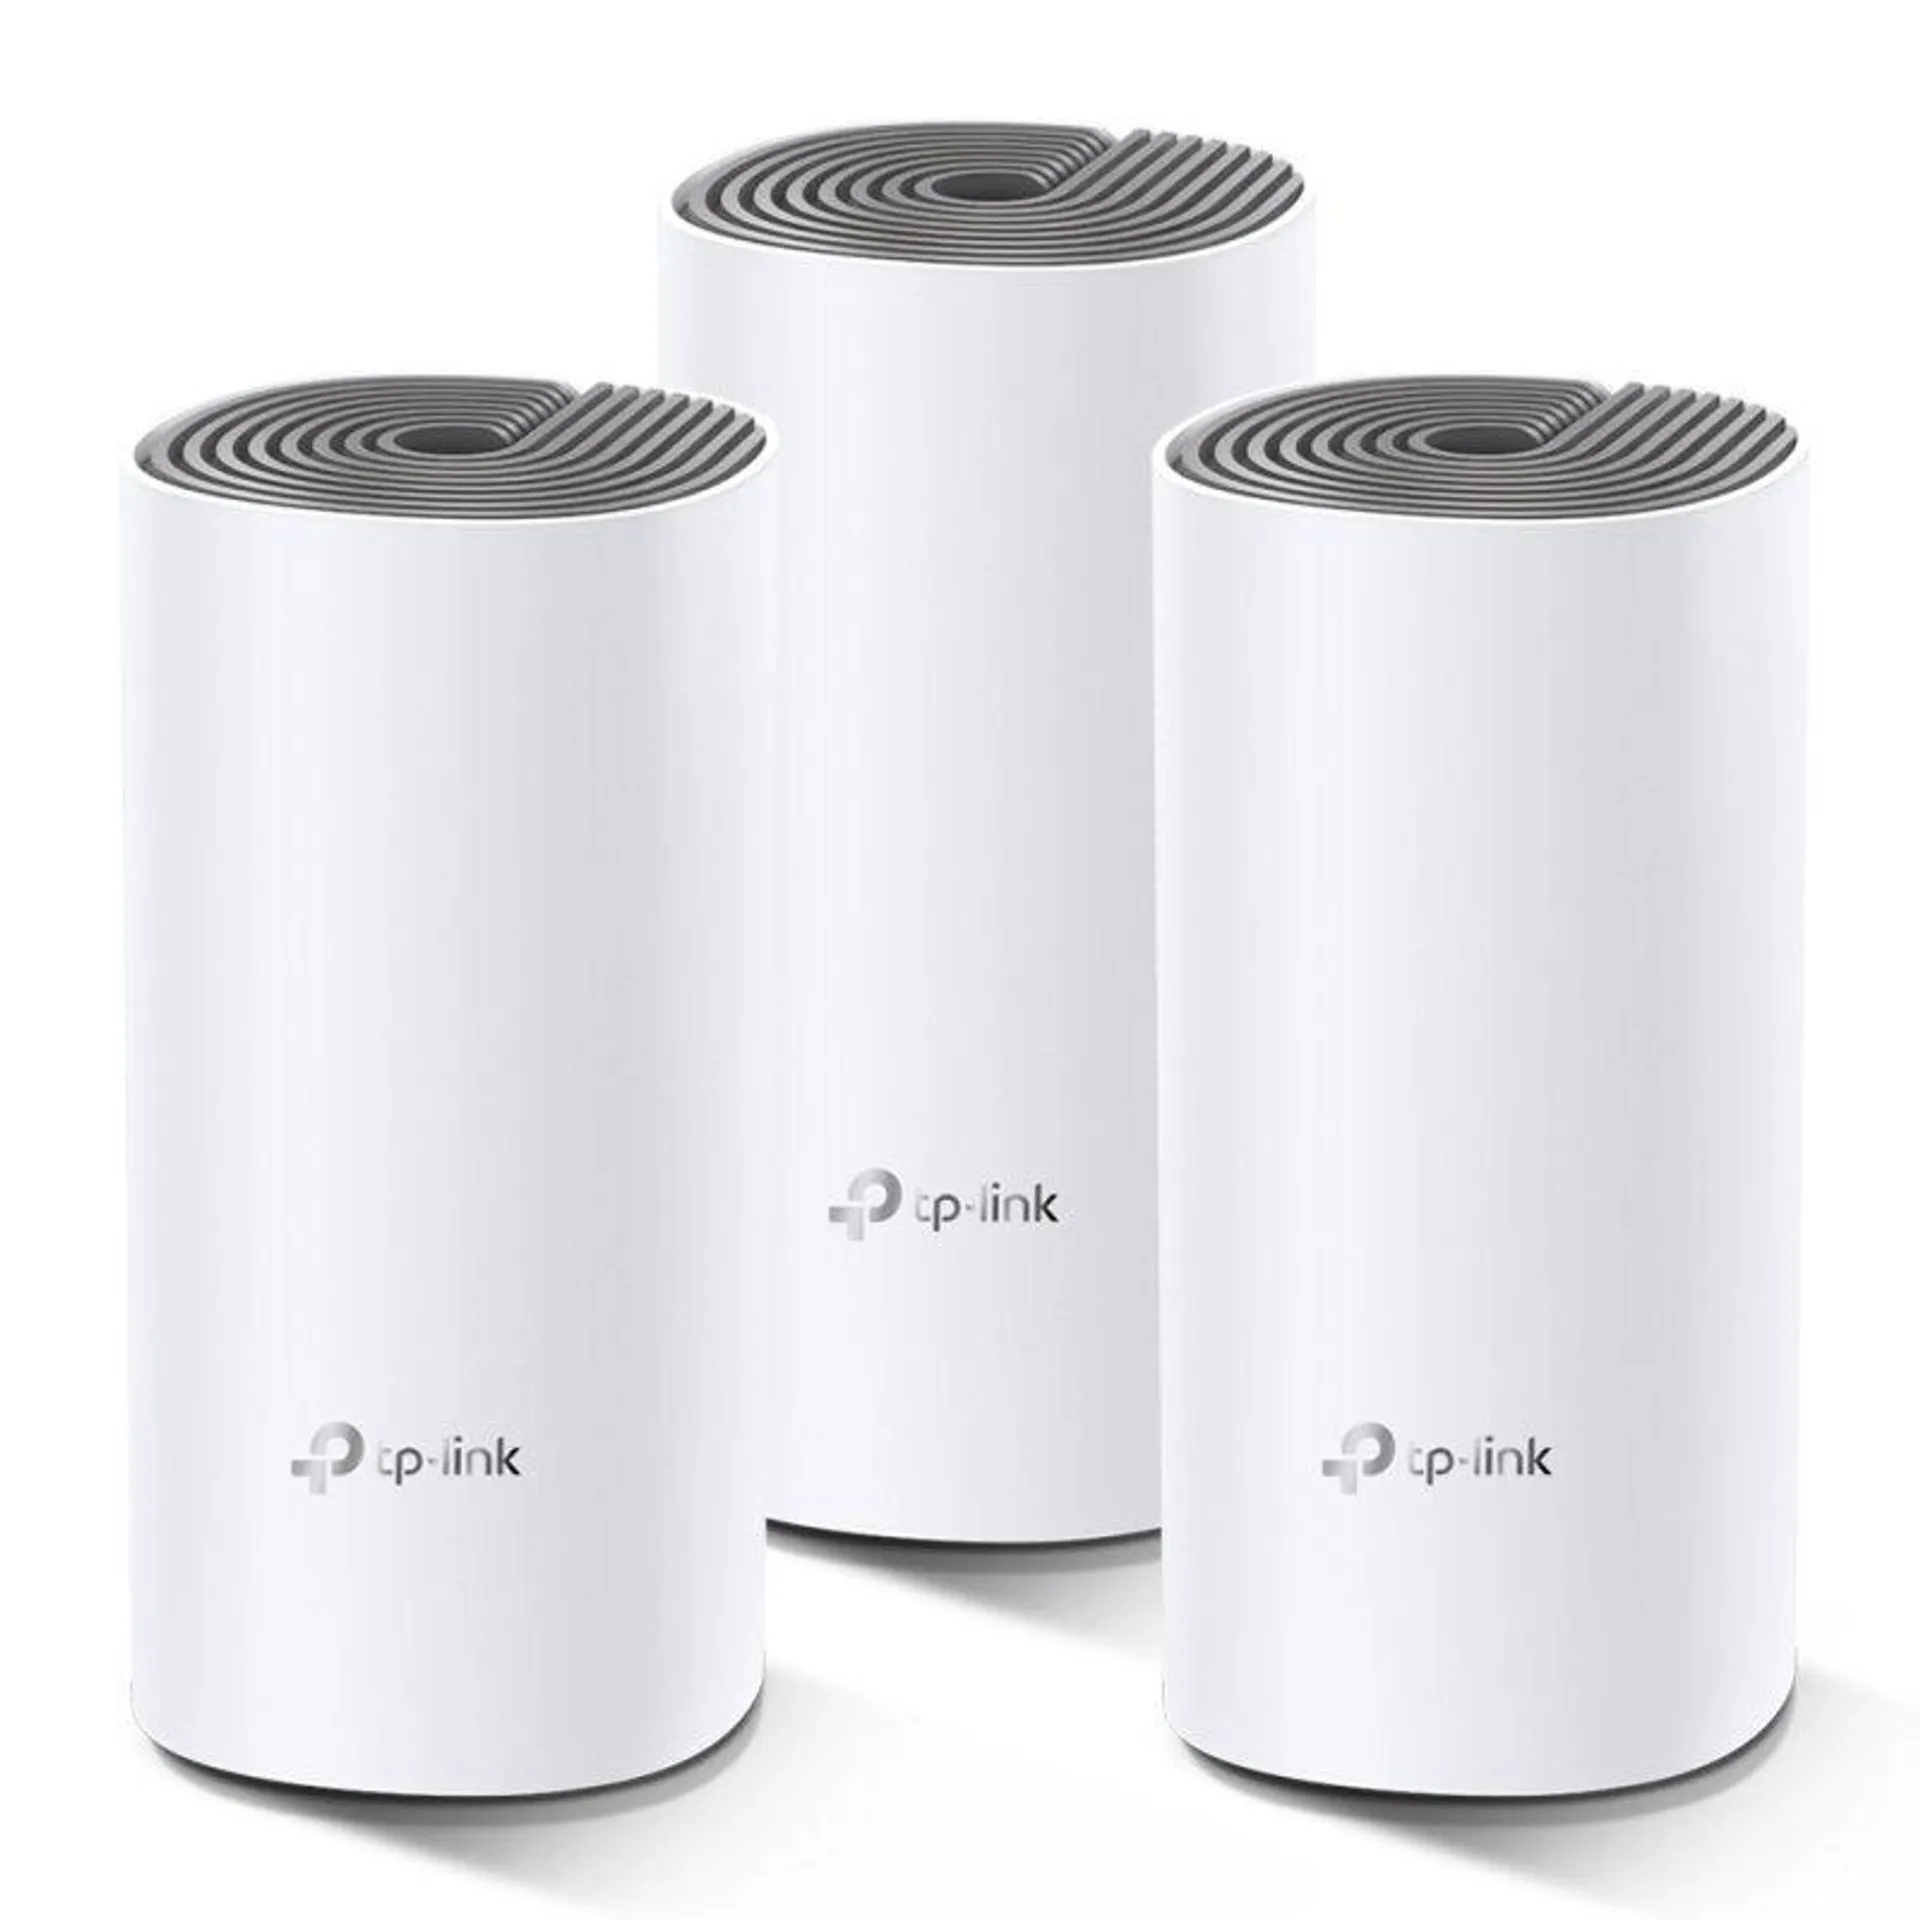 TP-Link Deco E4 AC1200 Dual-Band Whole Home Mesh Wi-Fi System (3 Pack)